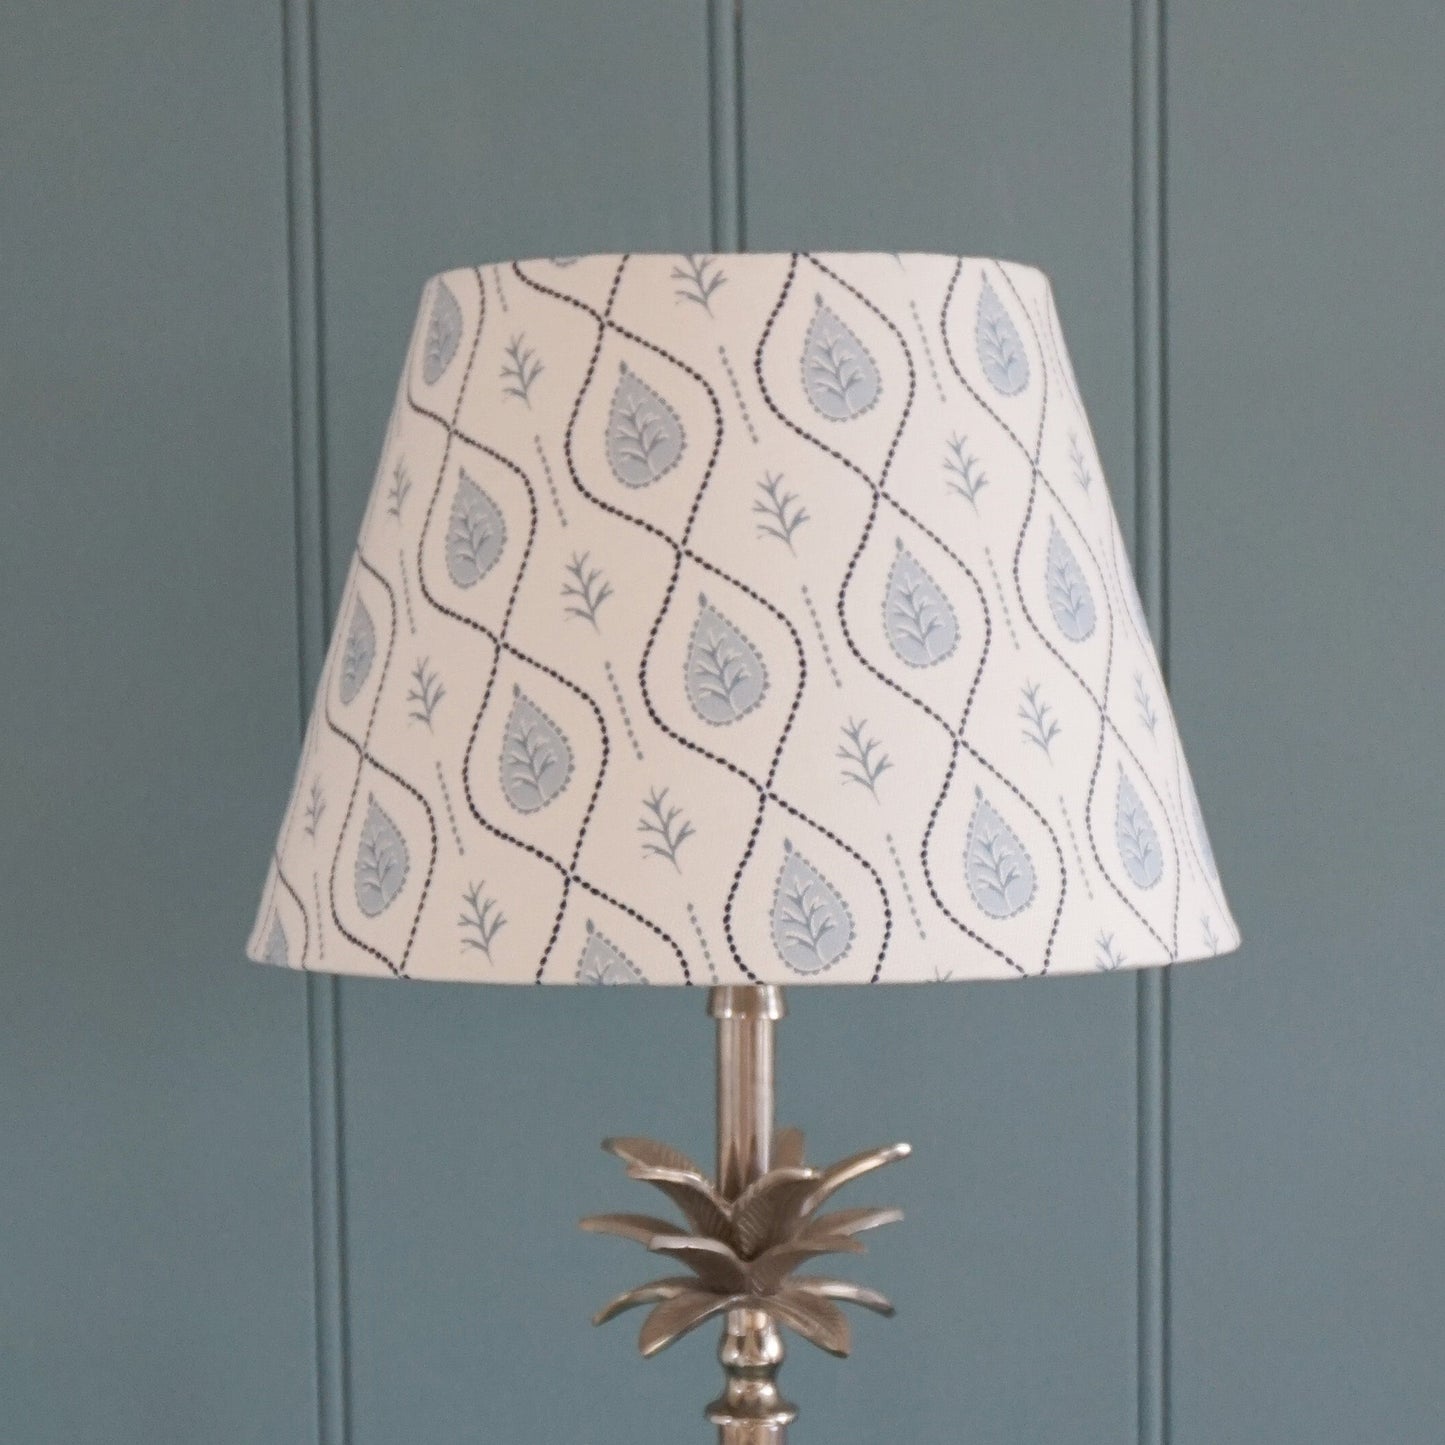 Learn to make your own lampshade